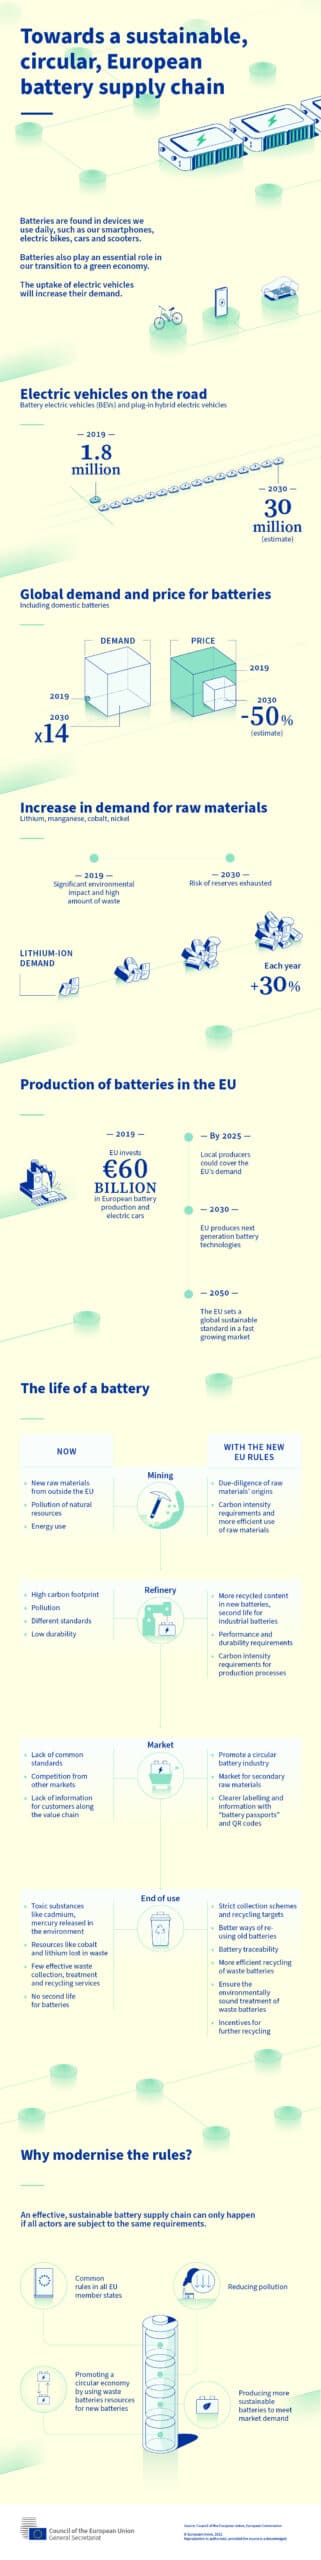 eu battery value chain infographic